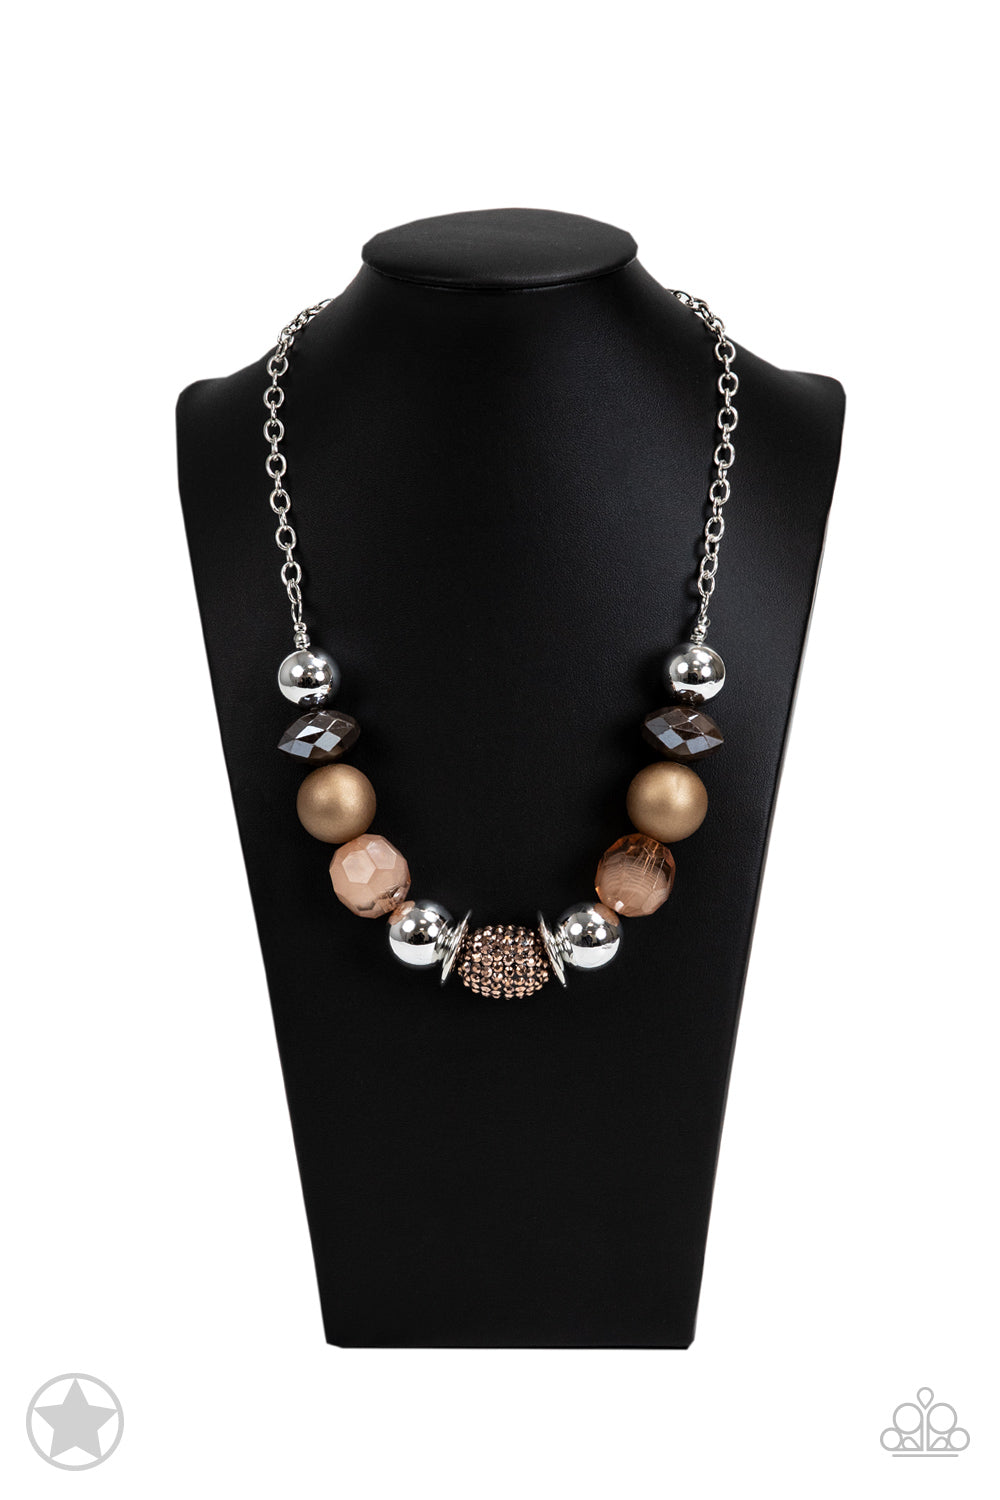 Paparazzi A Warm Welcome Copper Short Blockbuster Necklace - P2RE-CPSV-011II